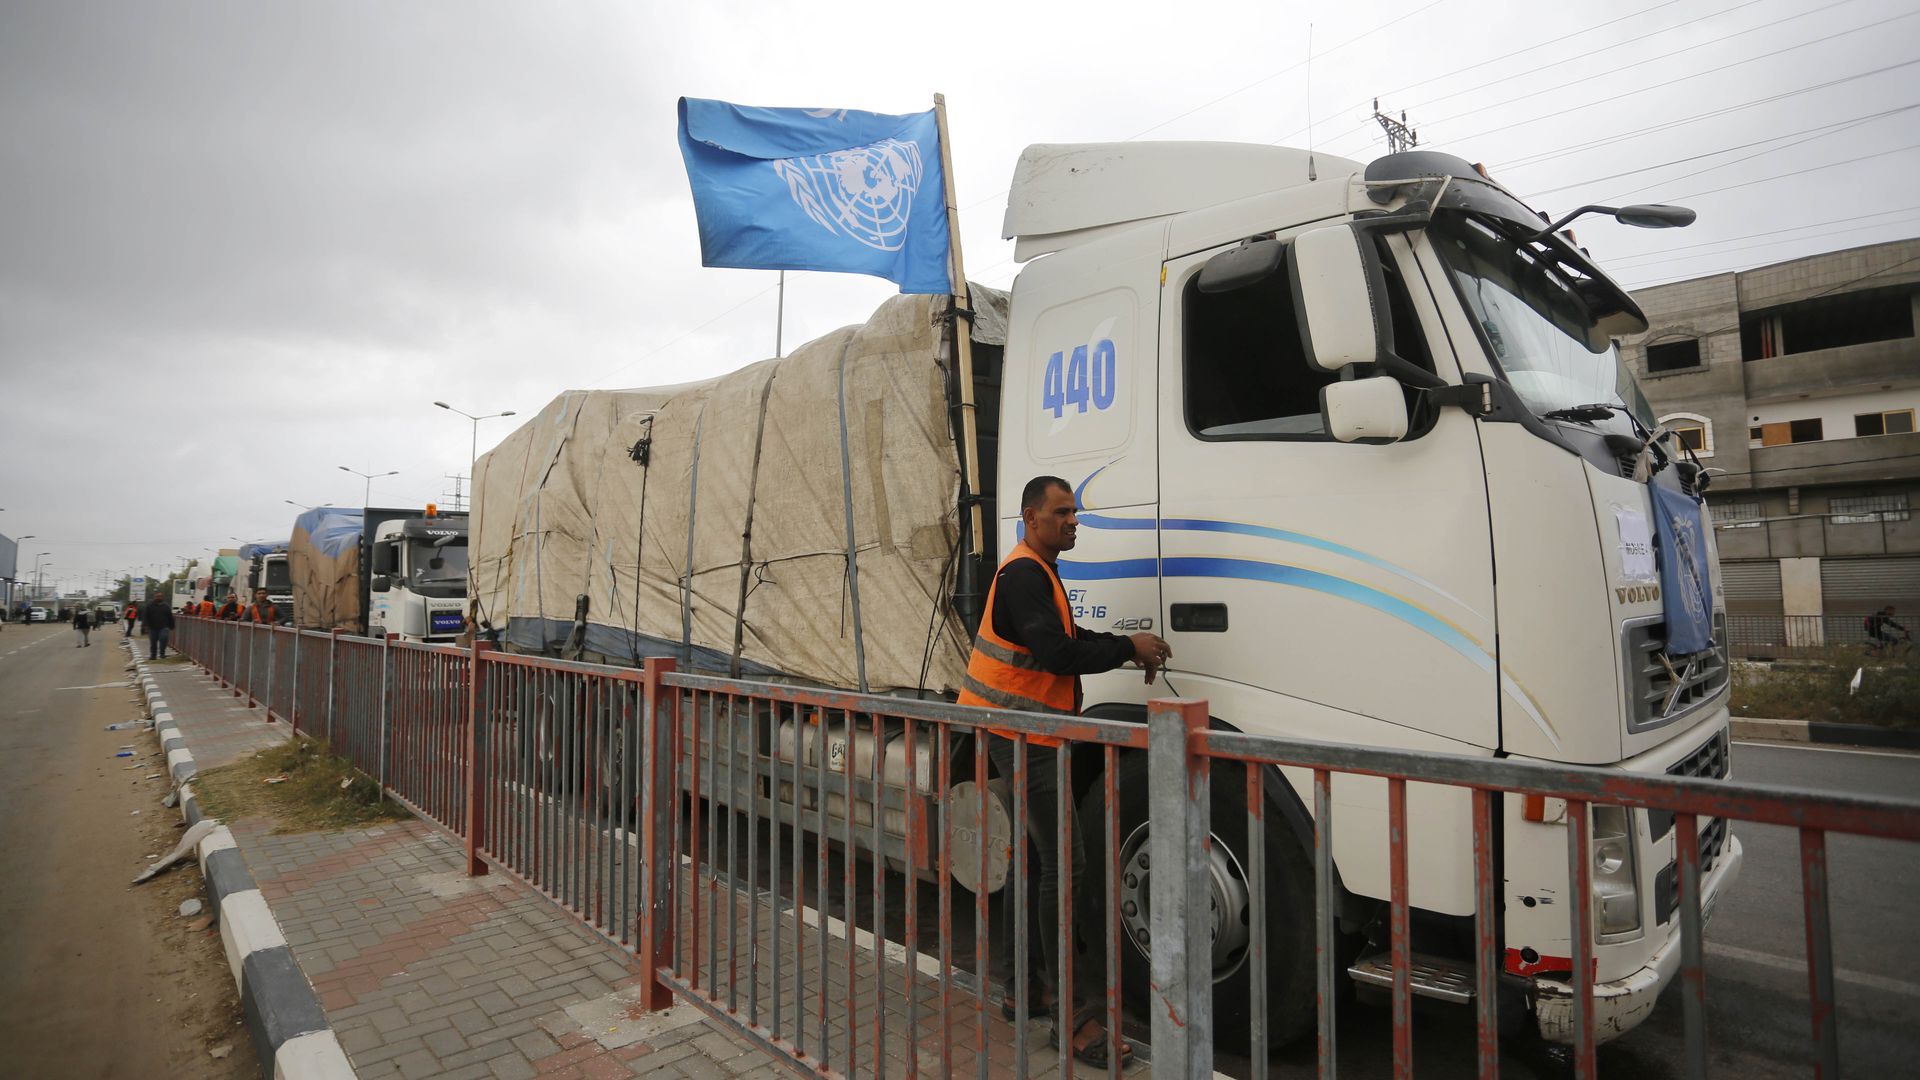 Aid trucks reach Gaza City during pause in fighting between Hamas and Israel. Photo: Ashraf Amra/Anadolu via Getty Images